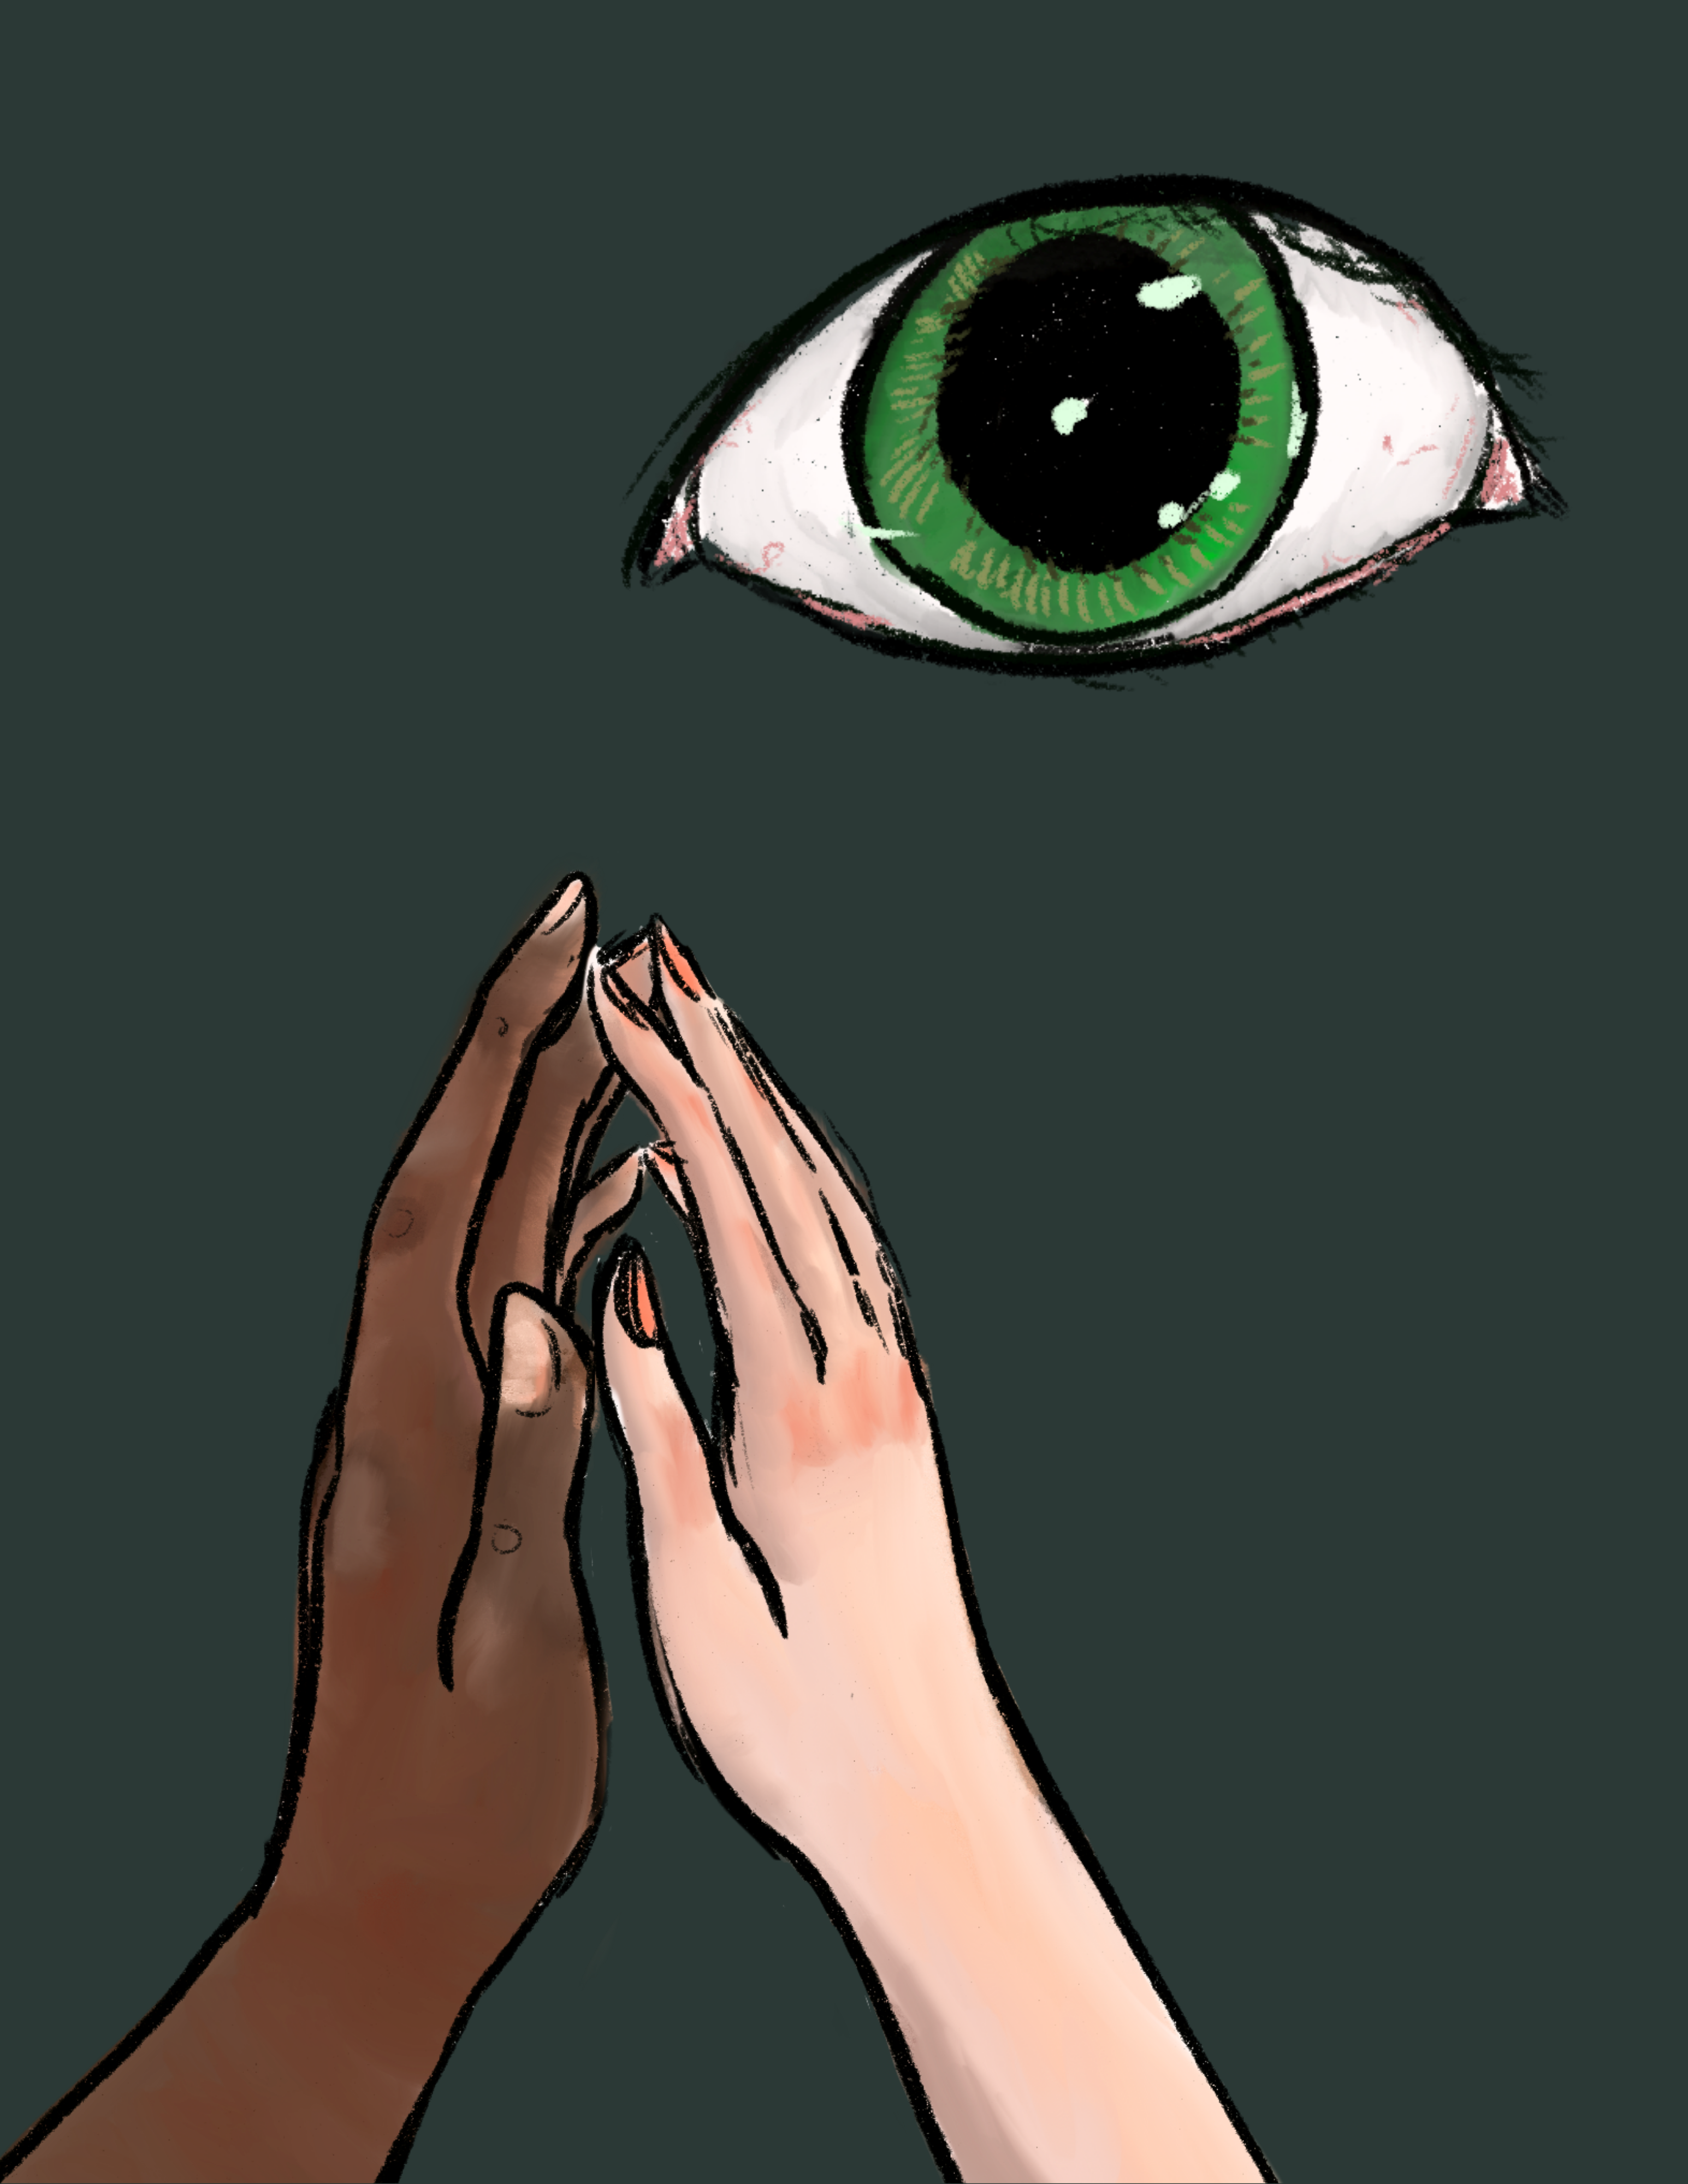 Image of two hands meeting, with green eye watching